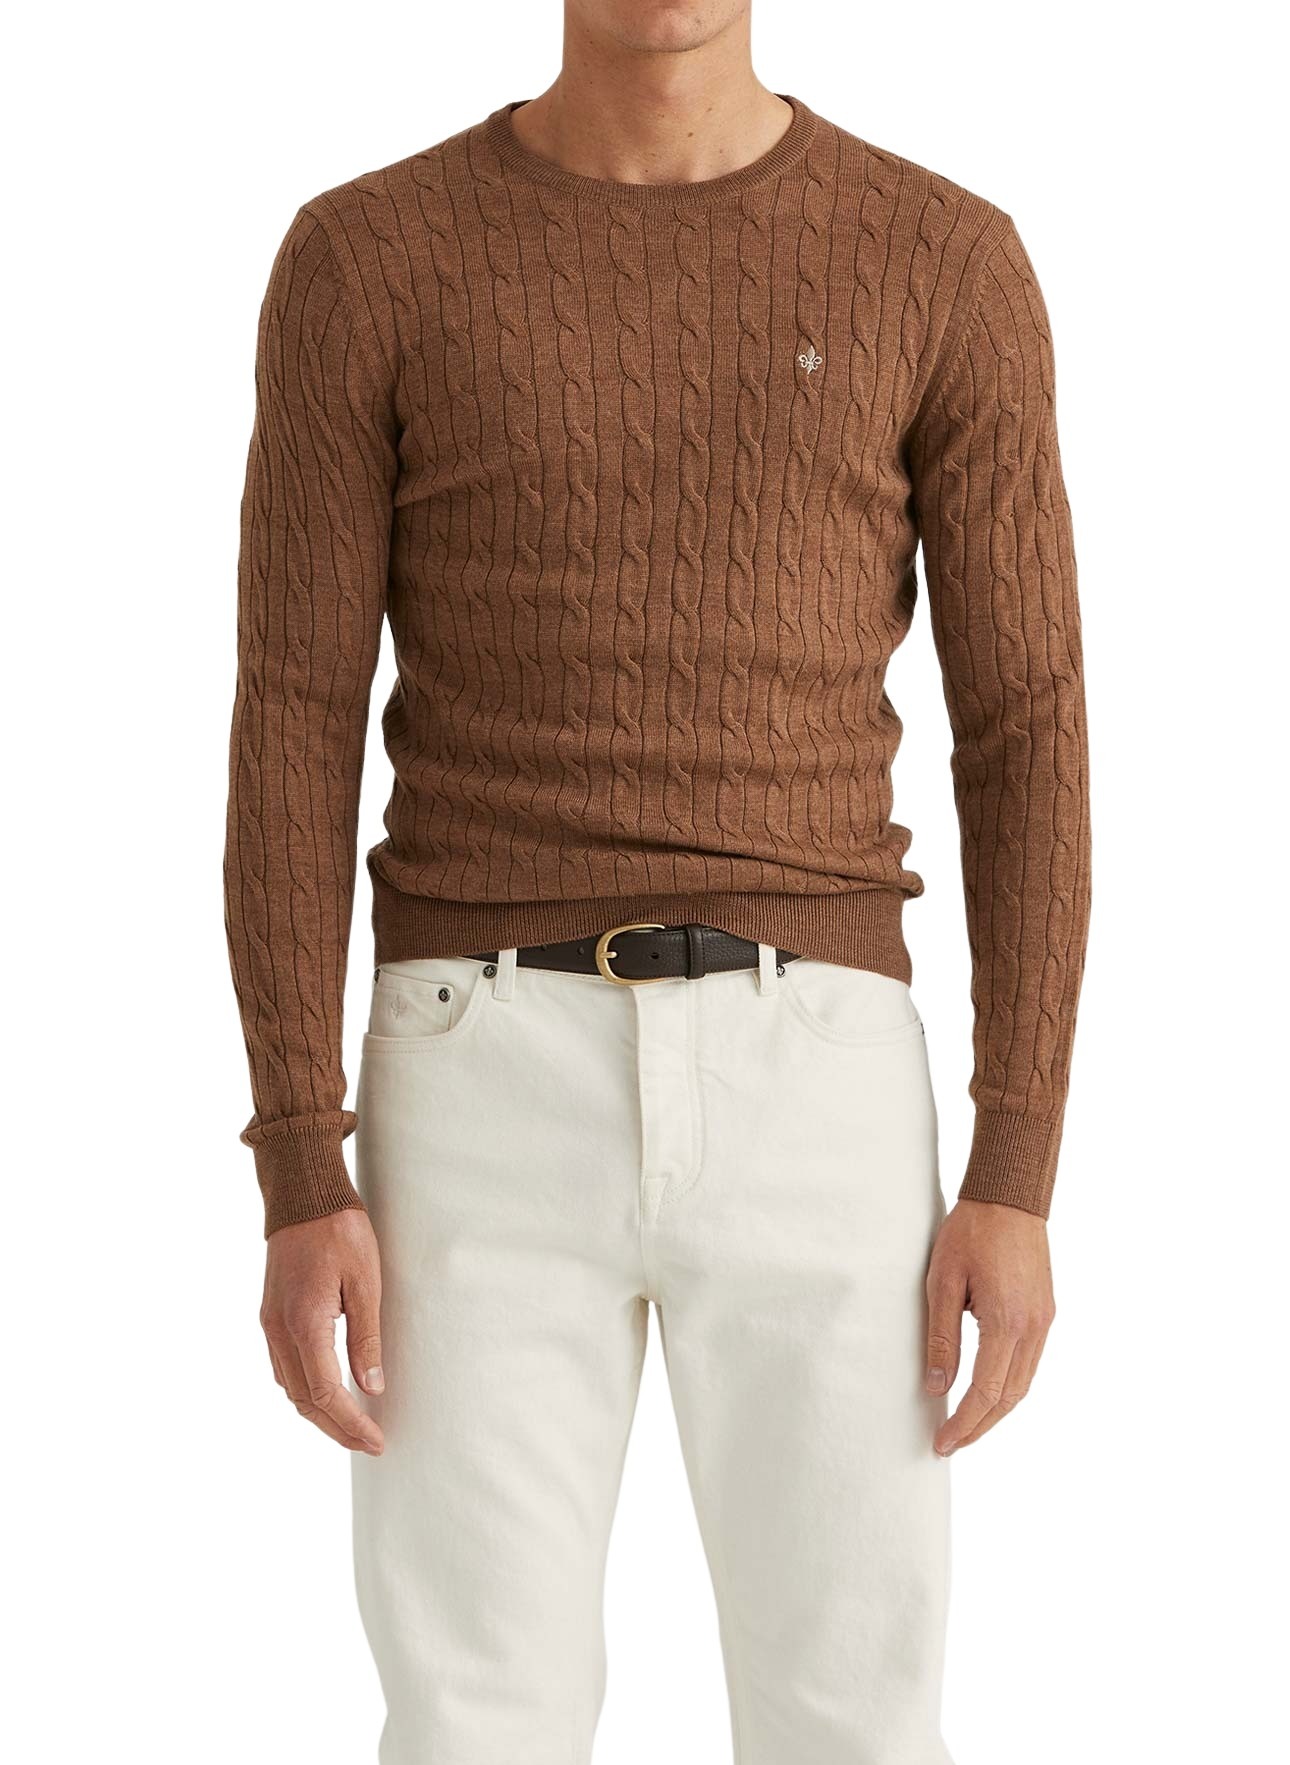 901274-merino-cable-oneck-09-camel-1